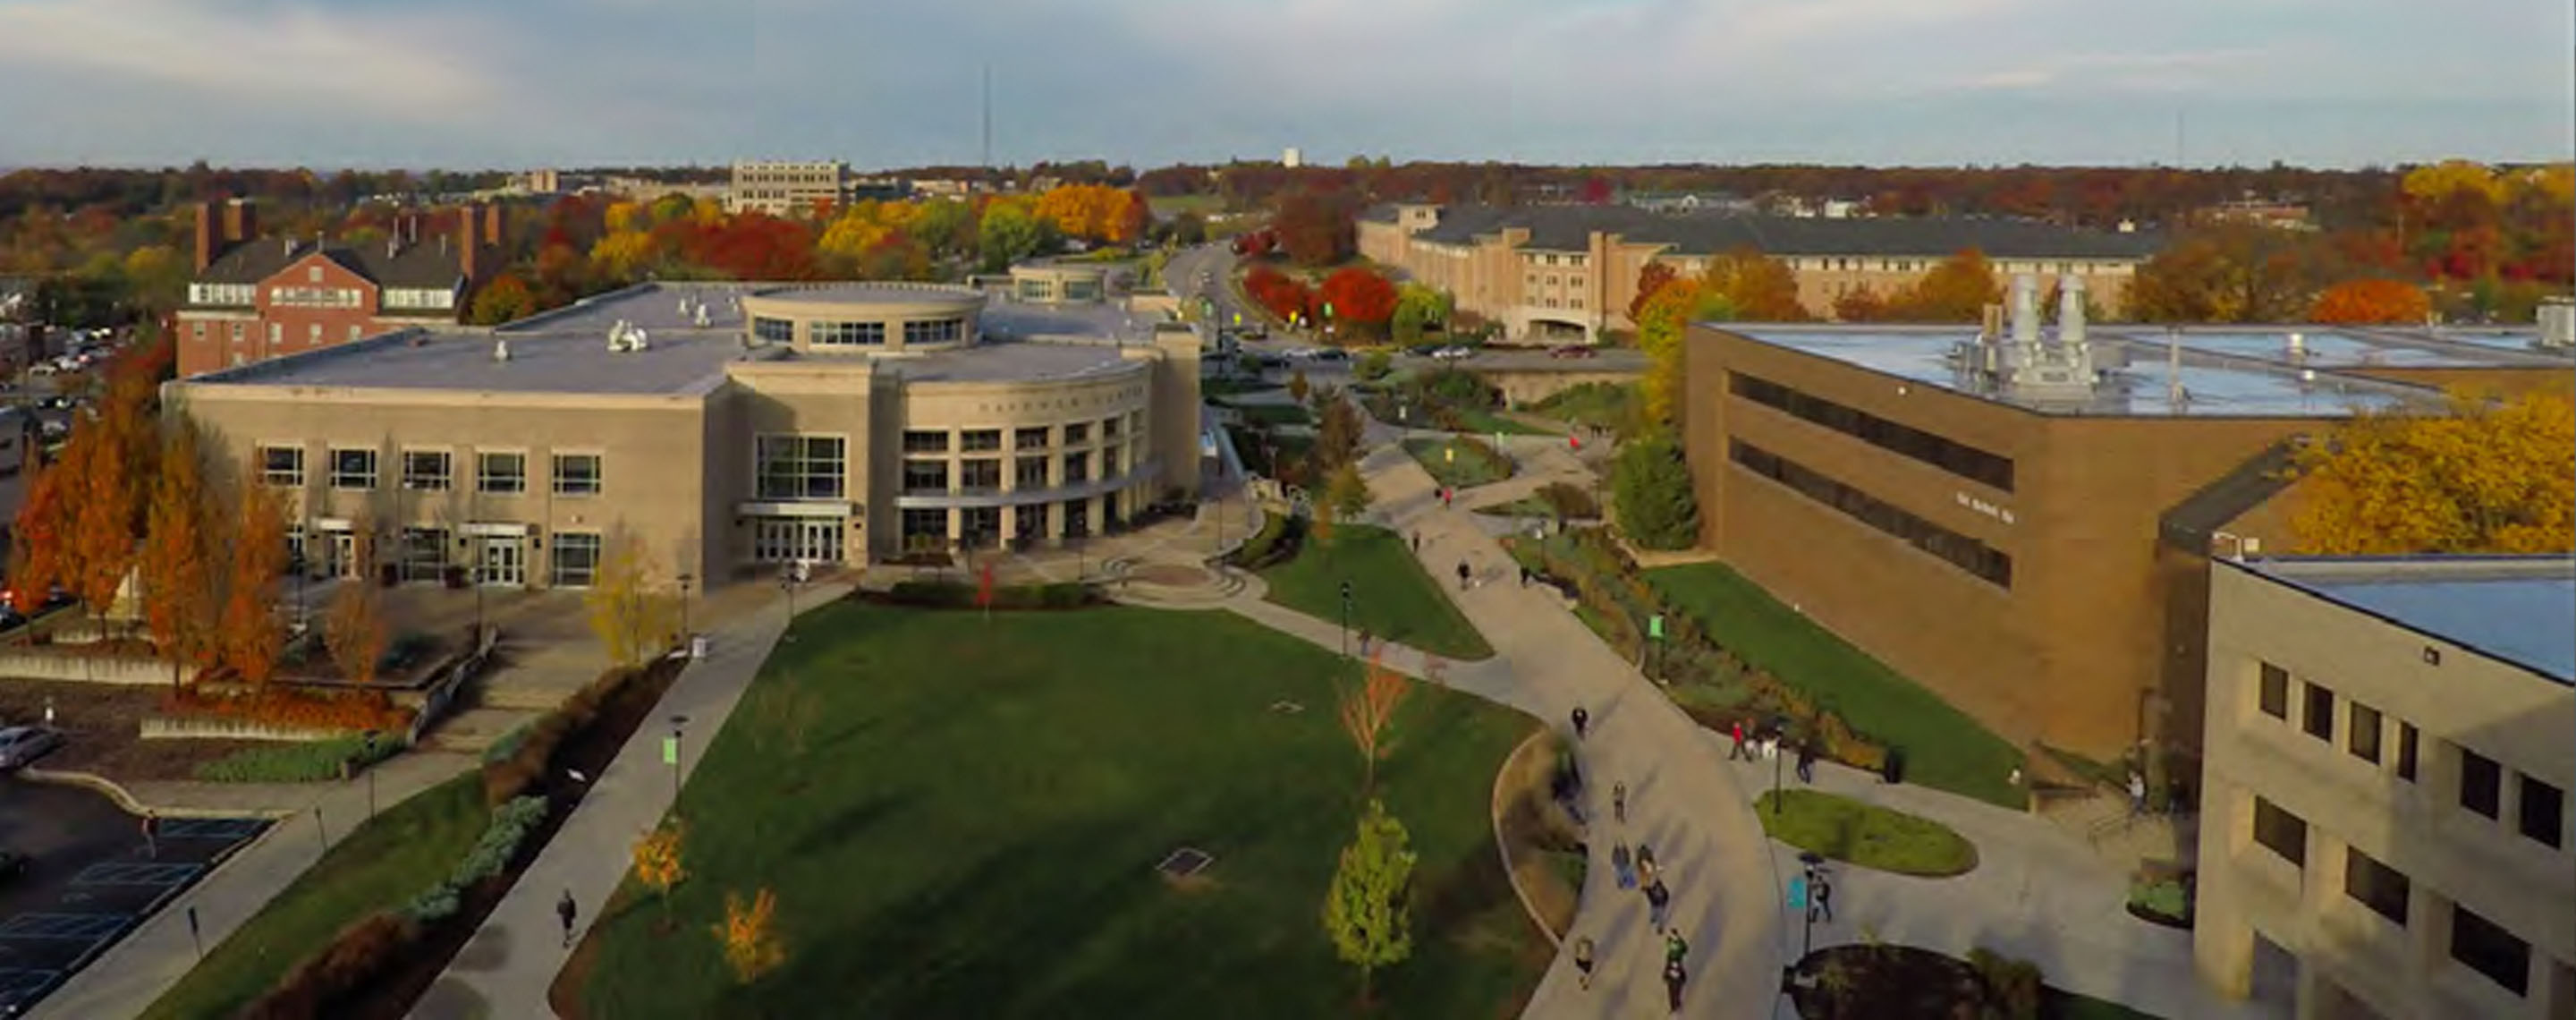 Apply to Missouri University of Science and Technology